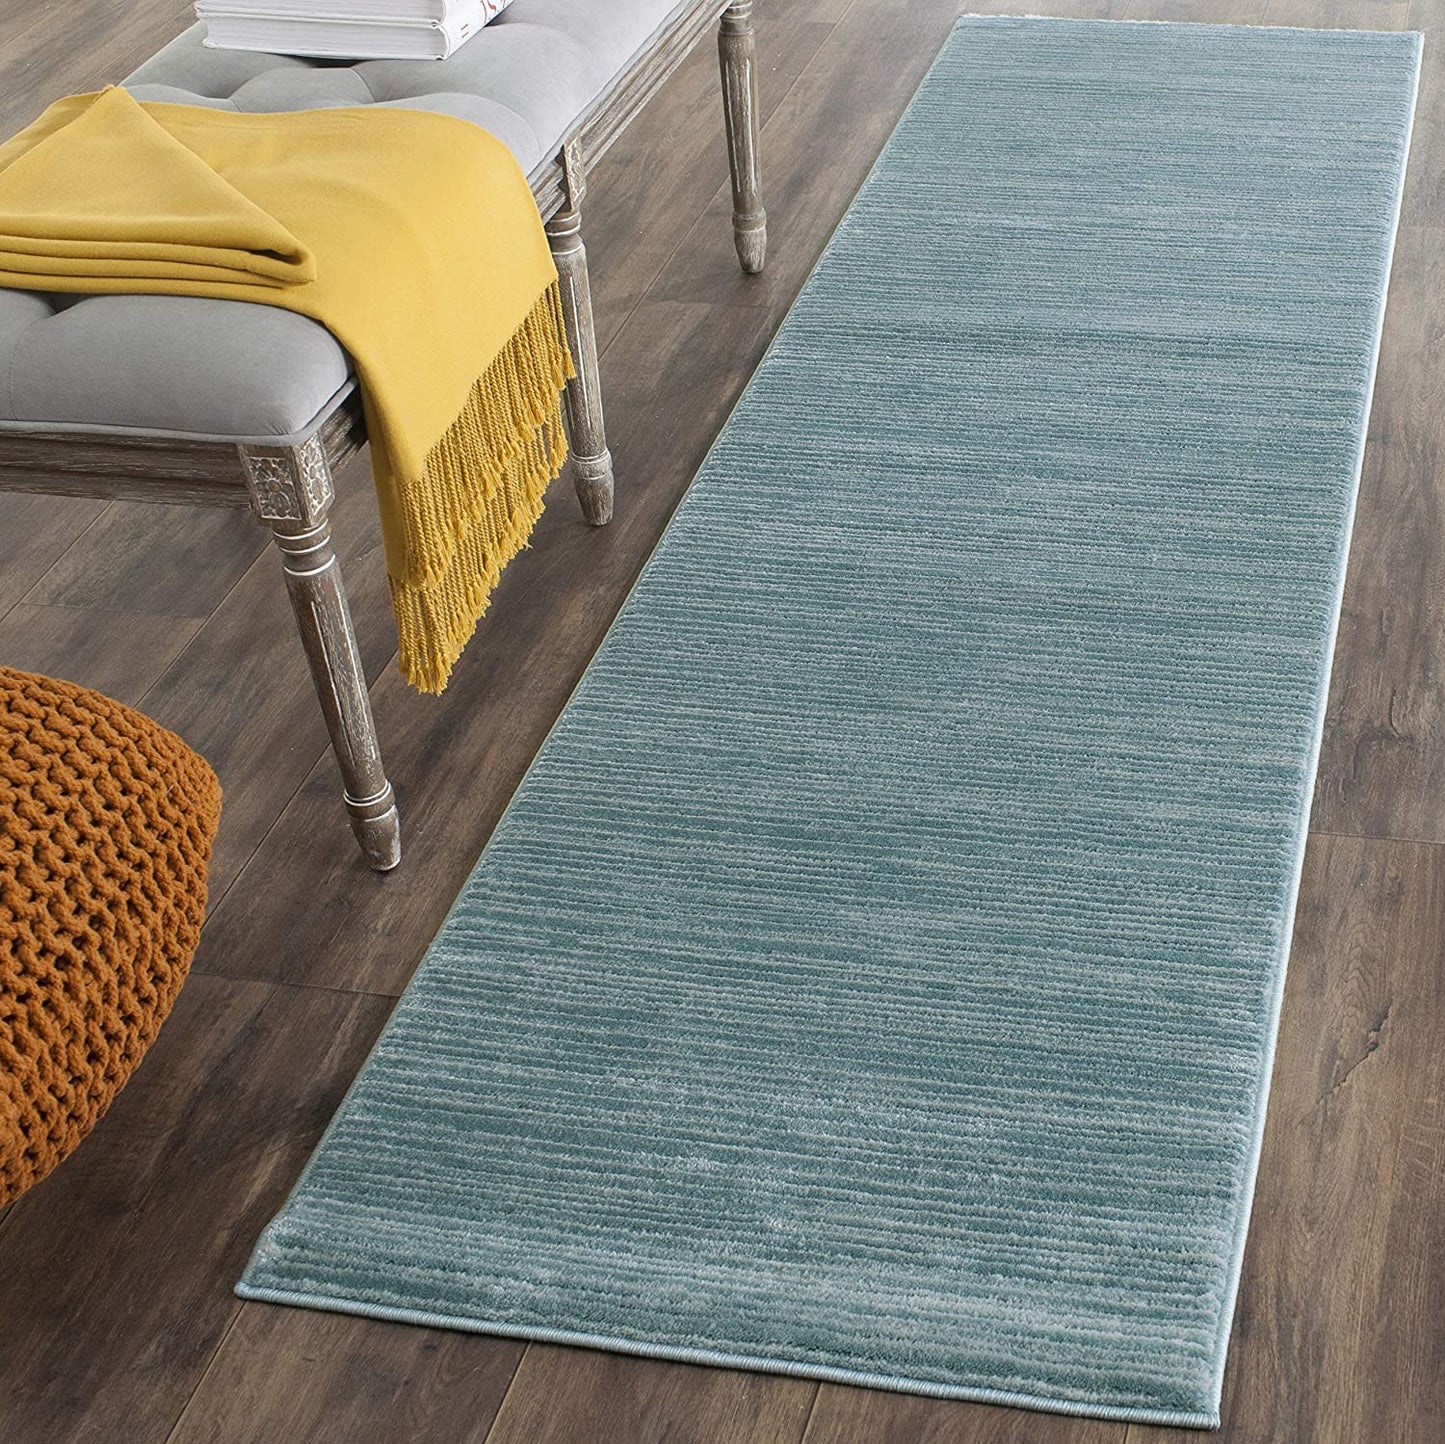 Safavieh Vision Collection VSN606B Modern Ombre Tonal Chic Non-Shedding Stain Resistant Living Room Bedroom Area Rug, 3' x 5', Aqua Kais